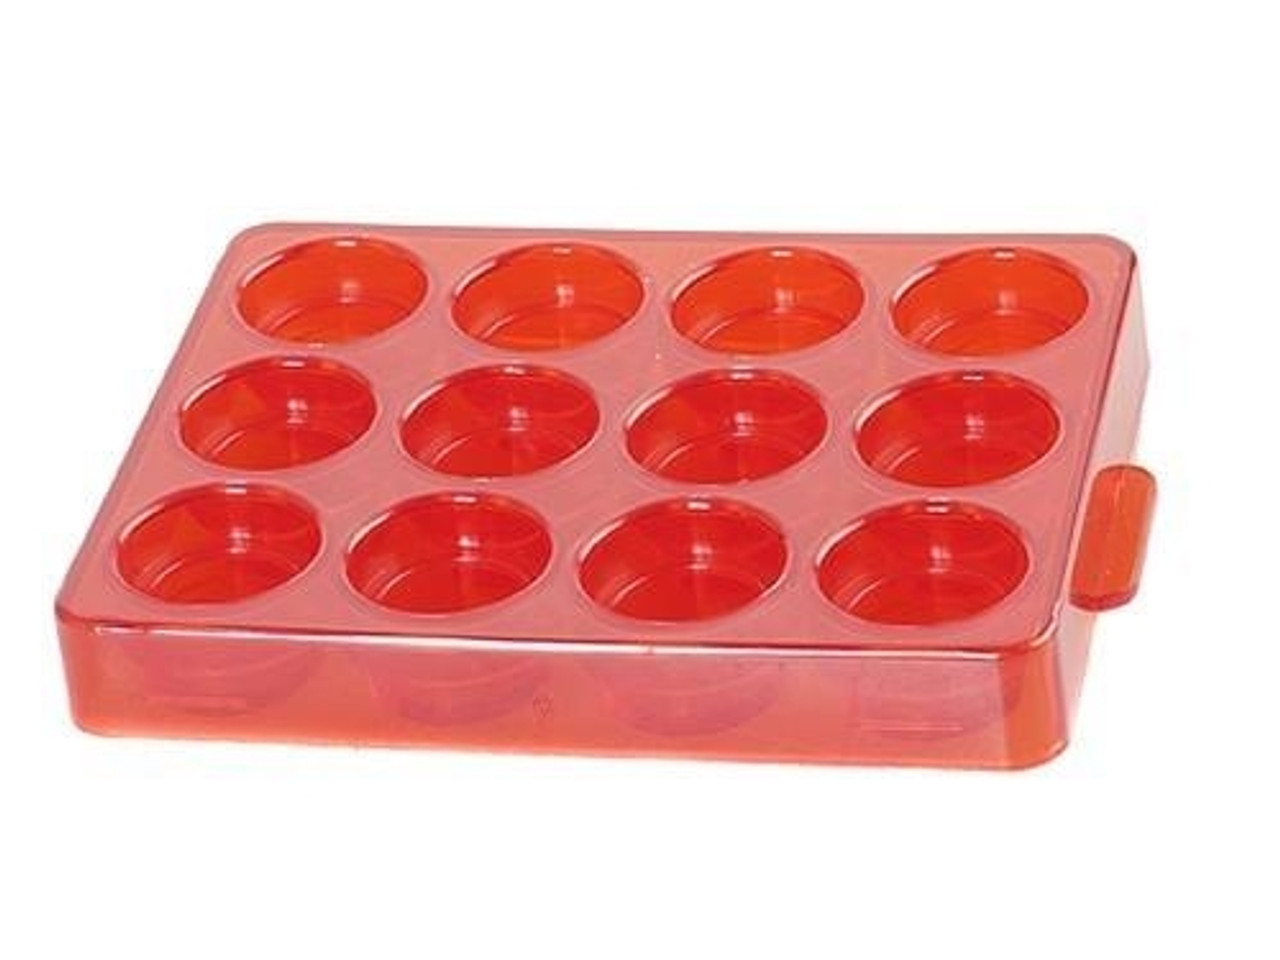 Lee Precision Universal Shell Holder Box Red